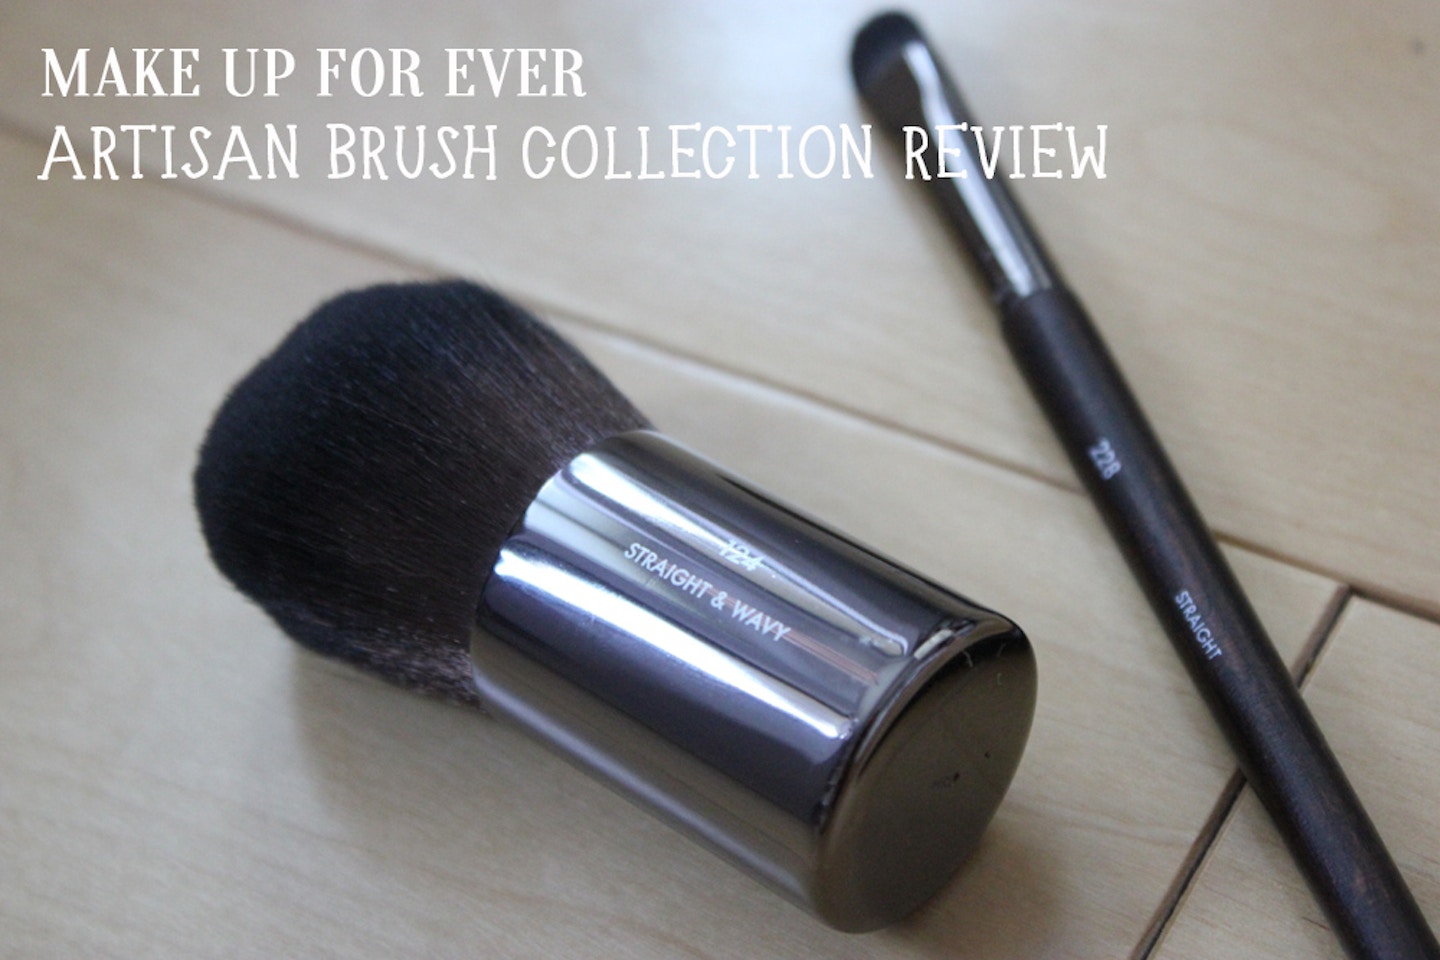 Make Up For Ever Artisan Brush Collection Review